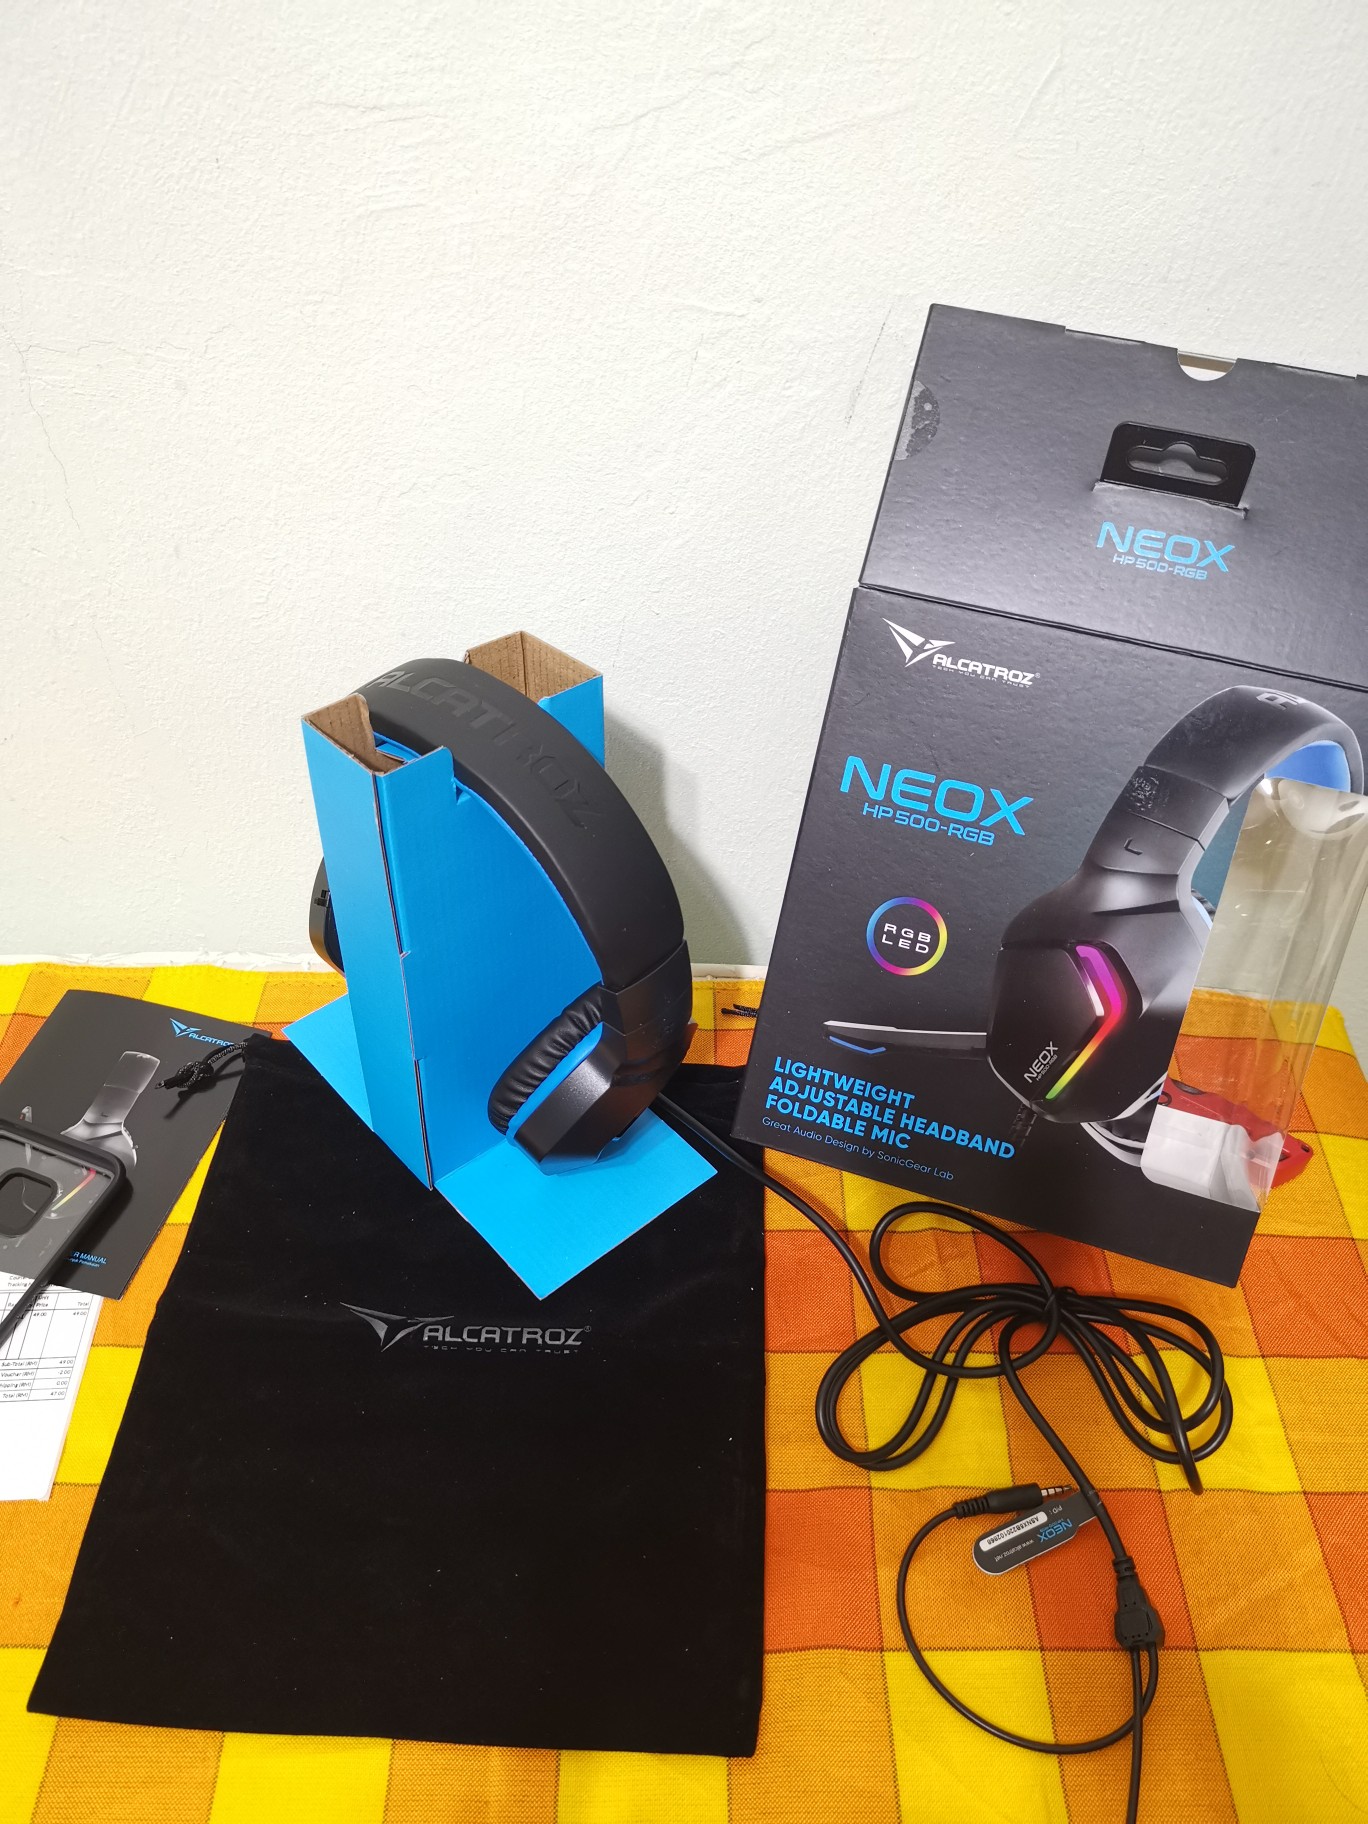 Review & GIVEAWAY! : Alcatroz Neox HP 500 RGB Gaming Headset 